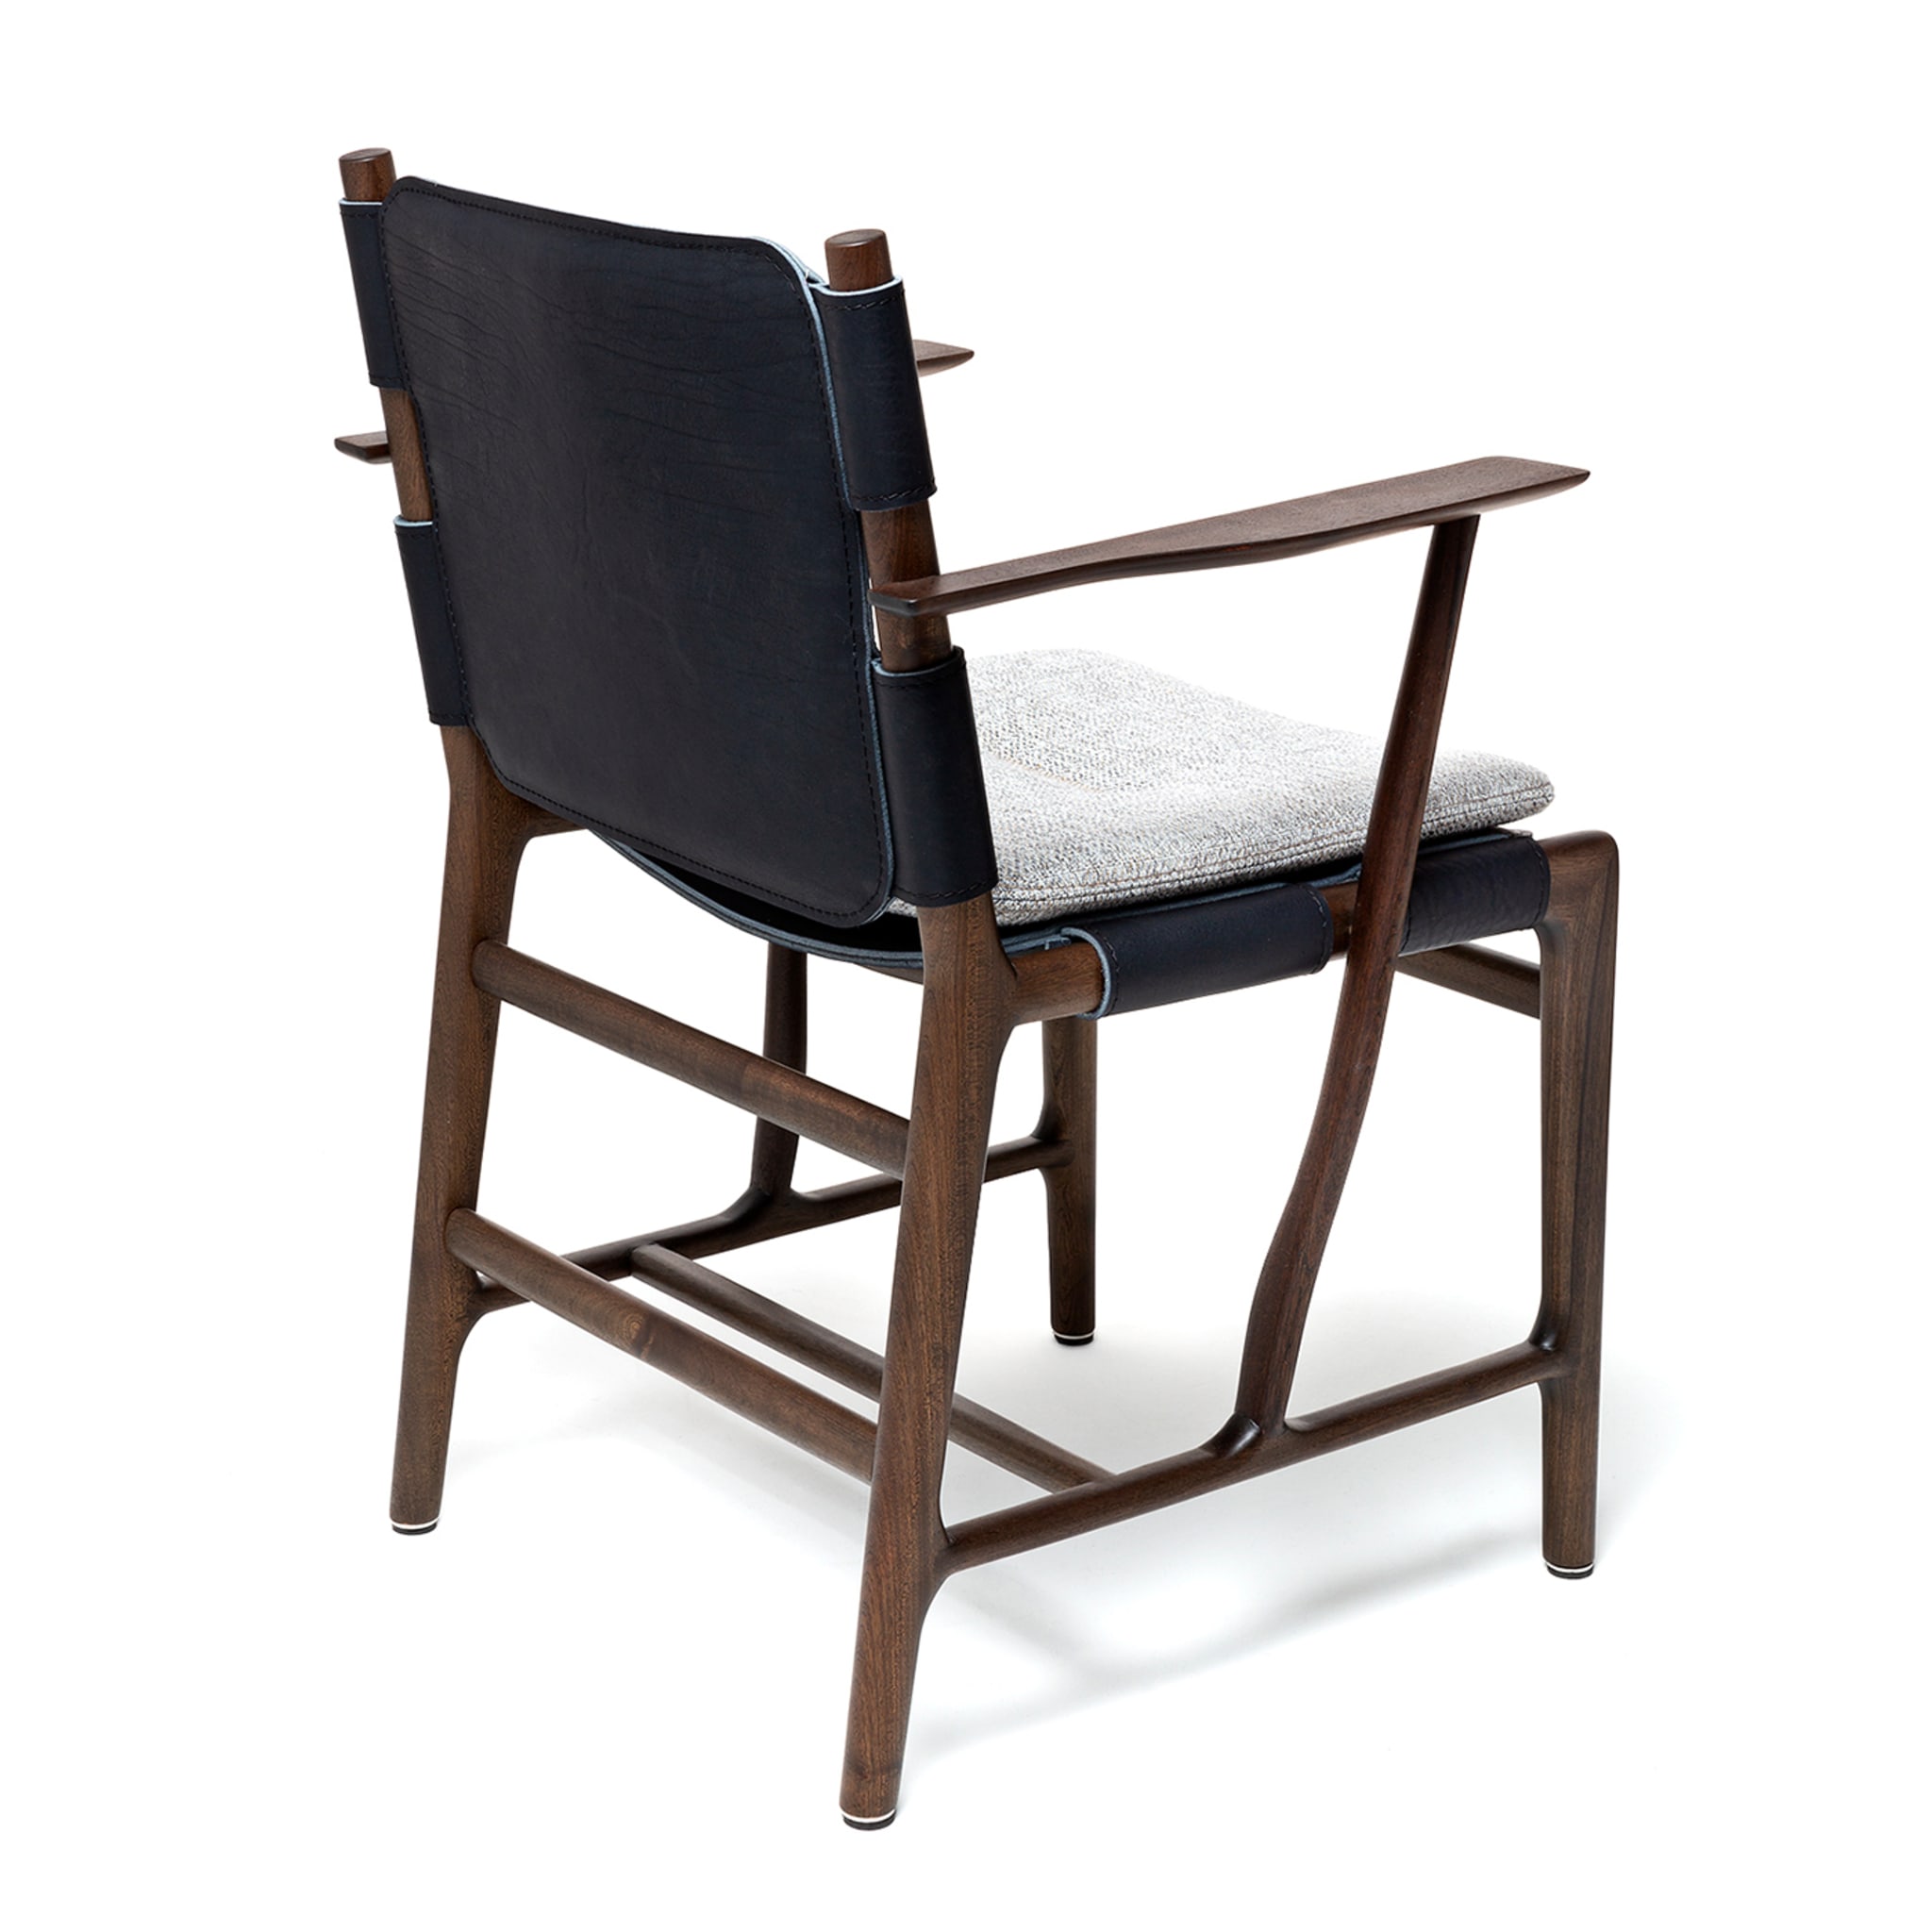 Levante Dark Chair with Armrests by Massimo Castagna - Alternative view 2